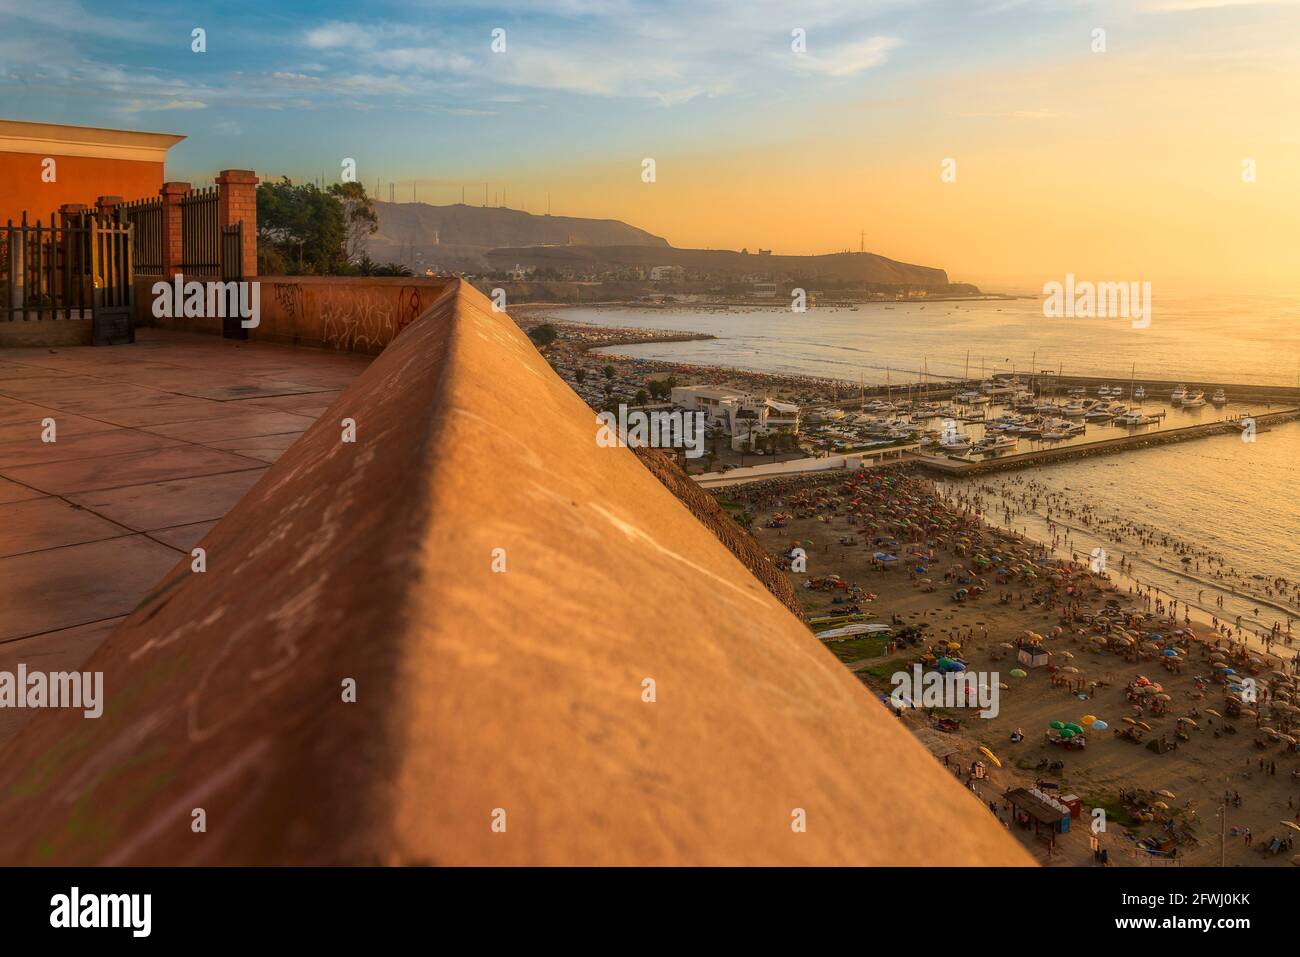 Looking at the beaches of Barranco at sunset, Lima, Peru. Stock Photo